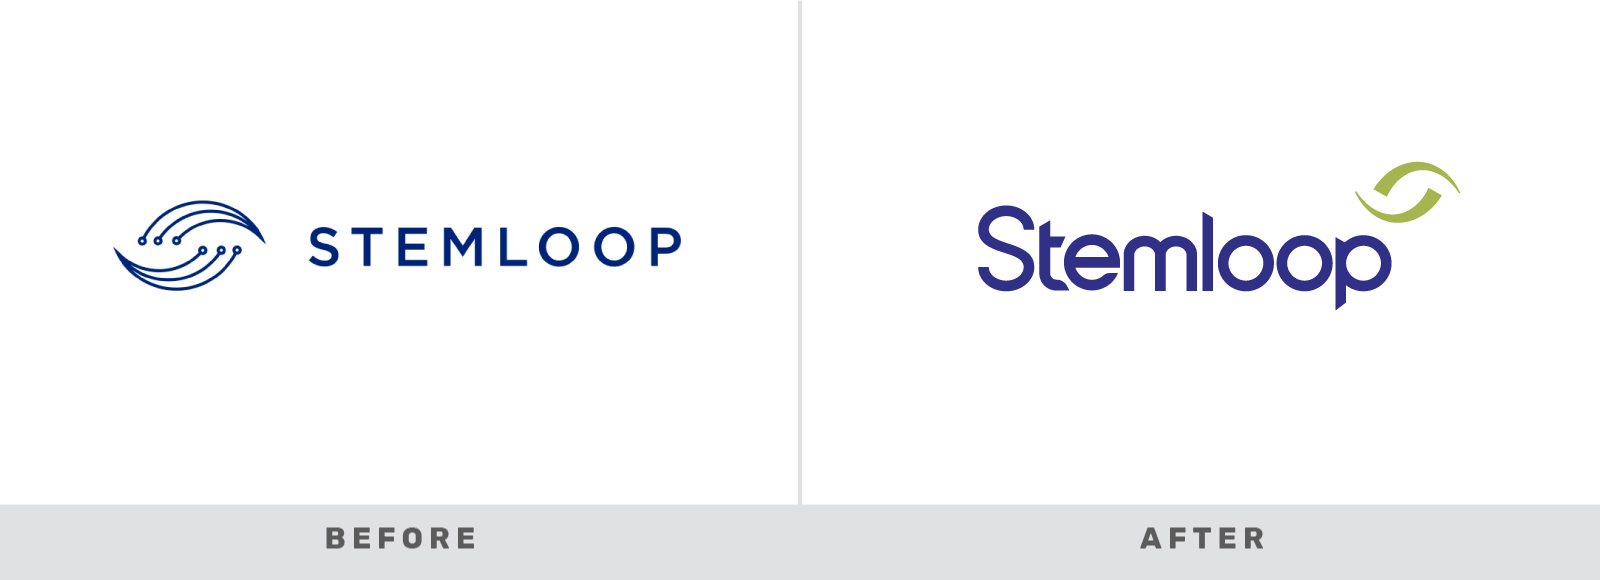 Before and After for the Stemloop logo changes showing the shift from dots and a wave to two crescents creating infinite loop